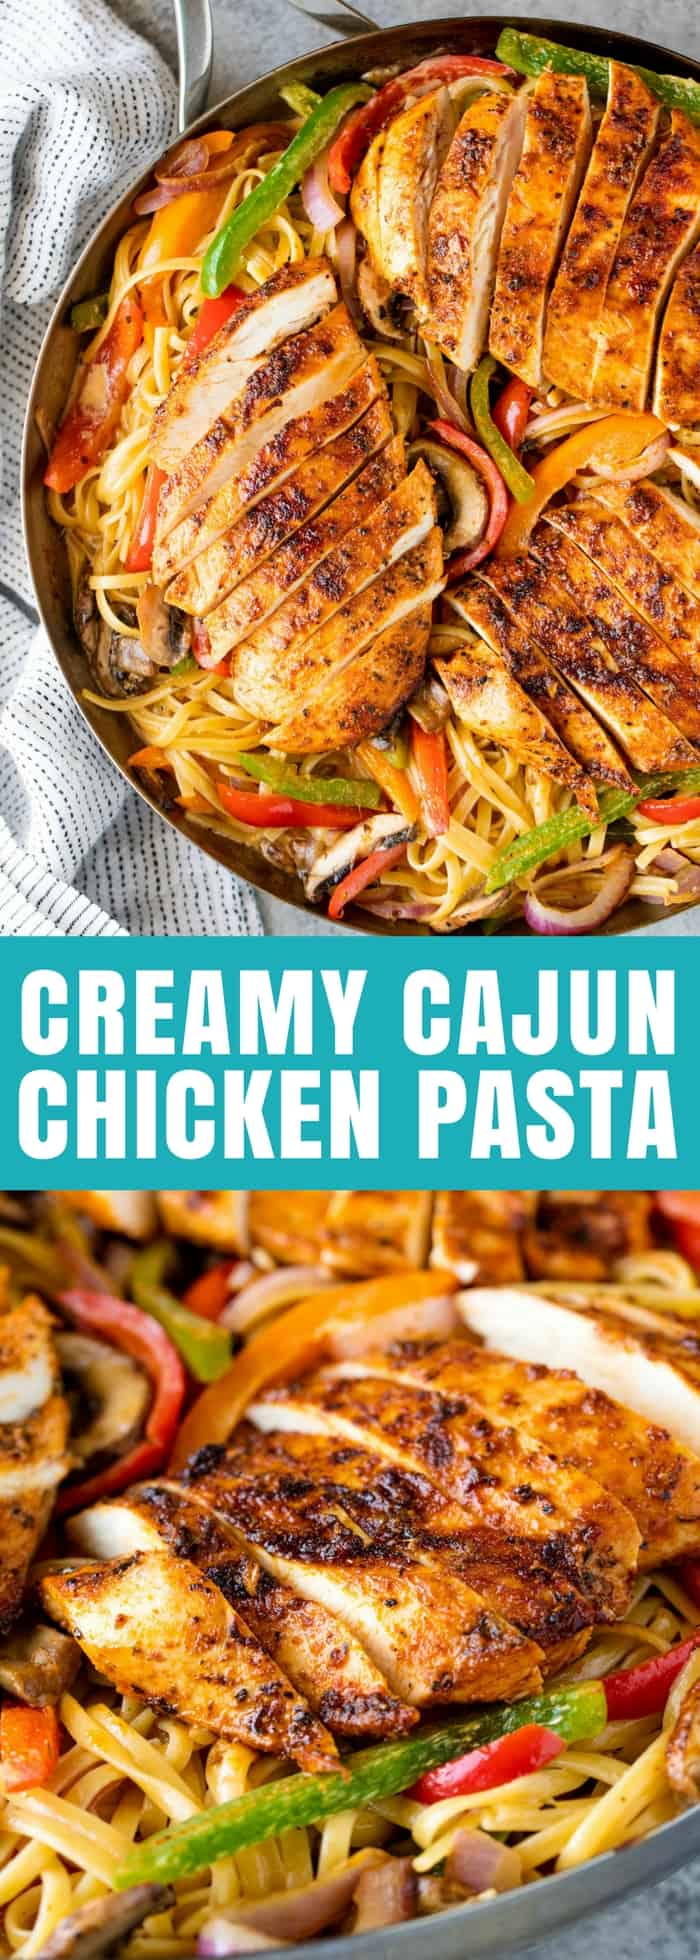 Creamy Cajun Chicken Pasta is the perfect family meal. Juicy cajun-spiced chicken is served over a bed of creamy linguine that's packed full of sautéed veggies. 